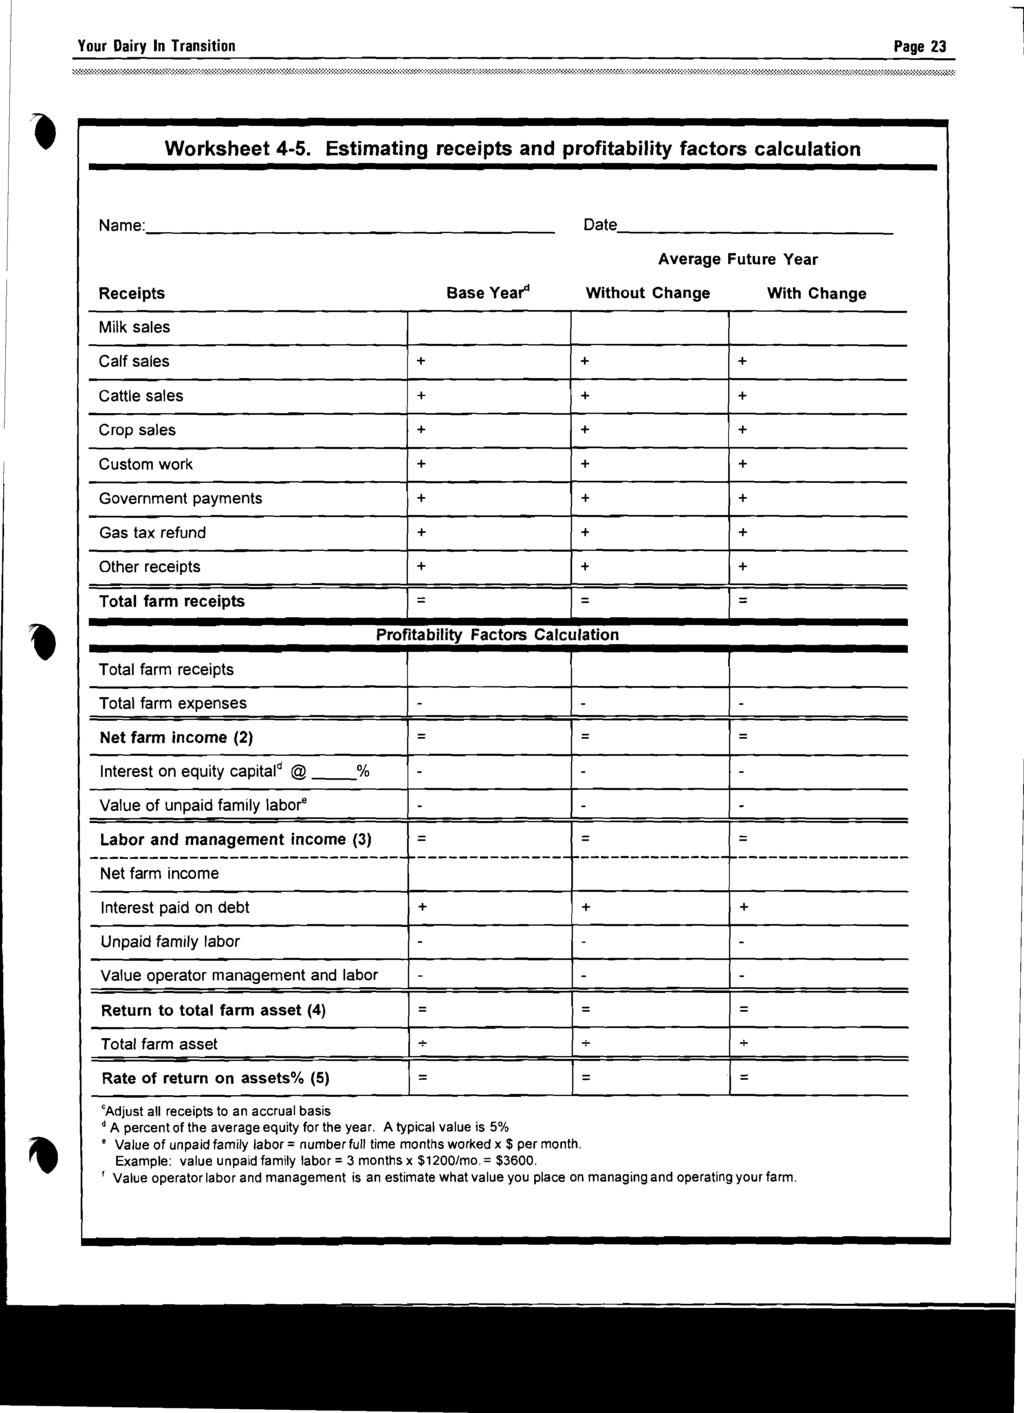 Your Dairy In Transition Page 23 Worksheet 4-5. Estimating receipts and profitability factors calculation Name: Date Average Future Year Receipts Base Year<!